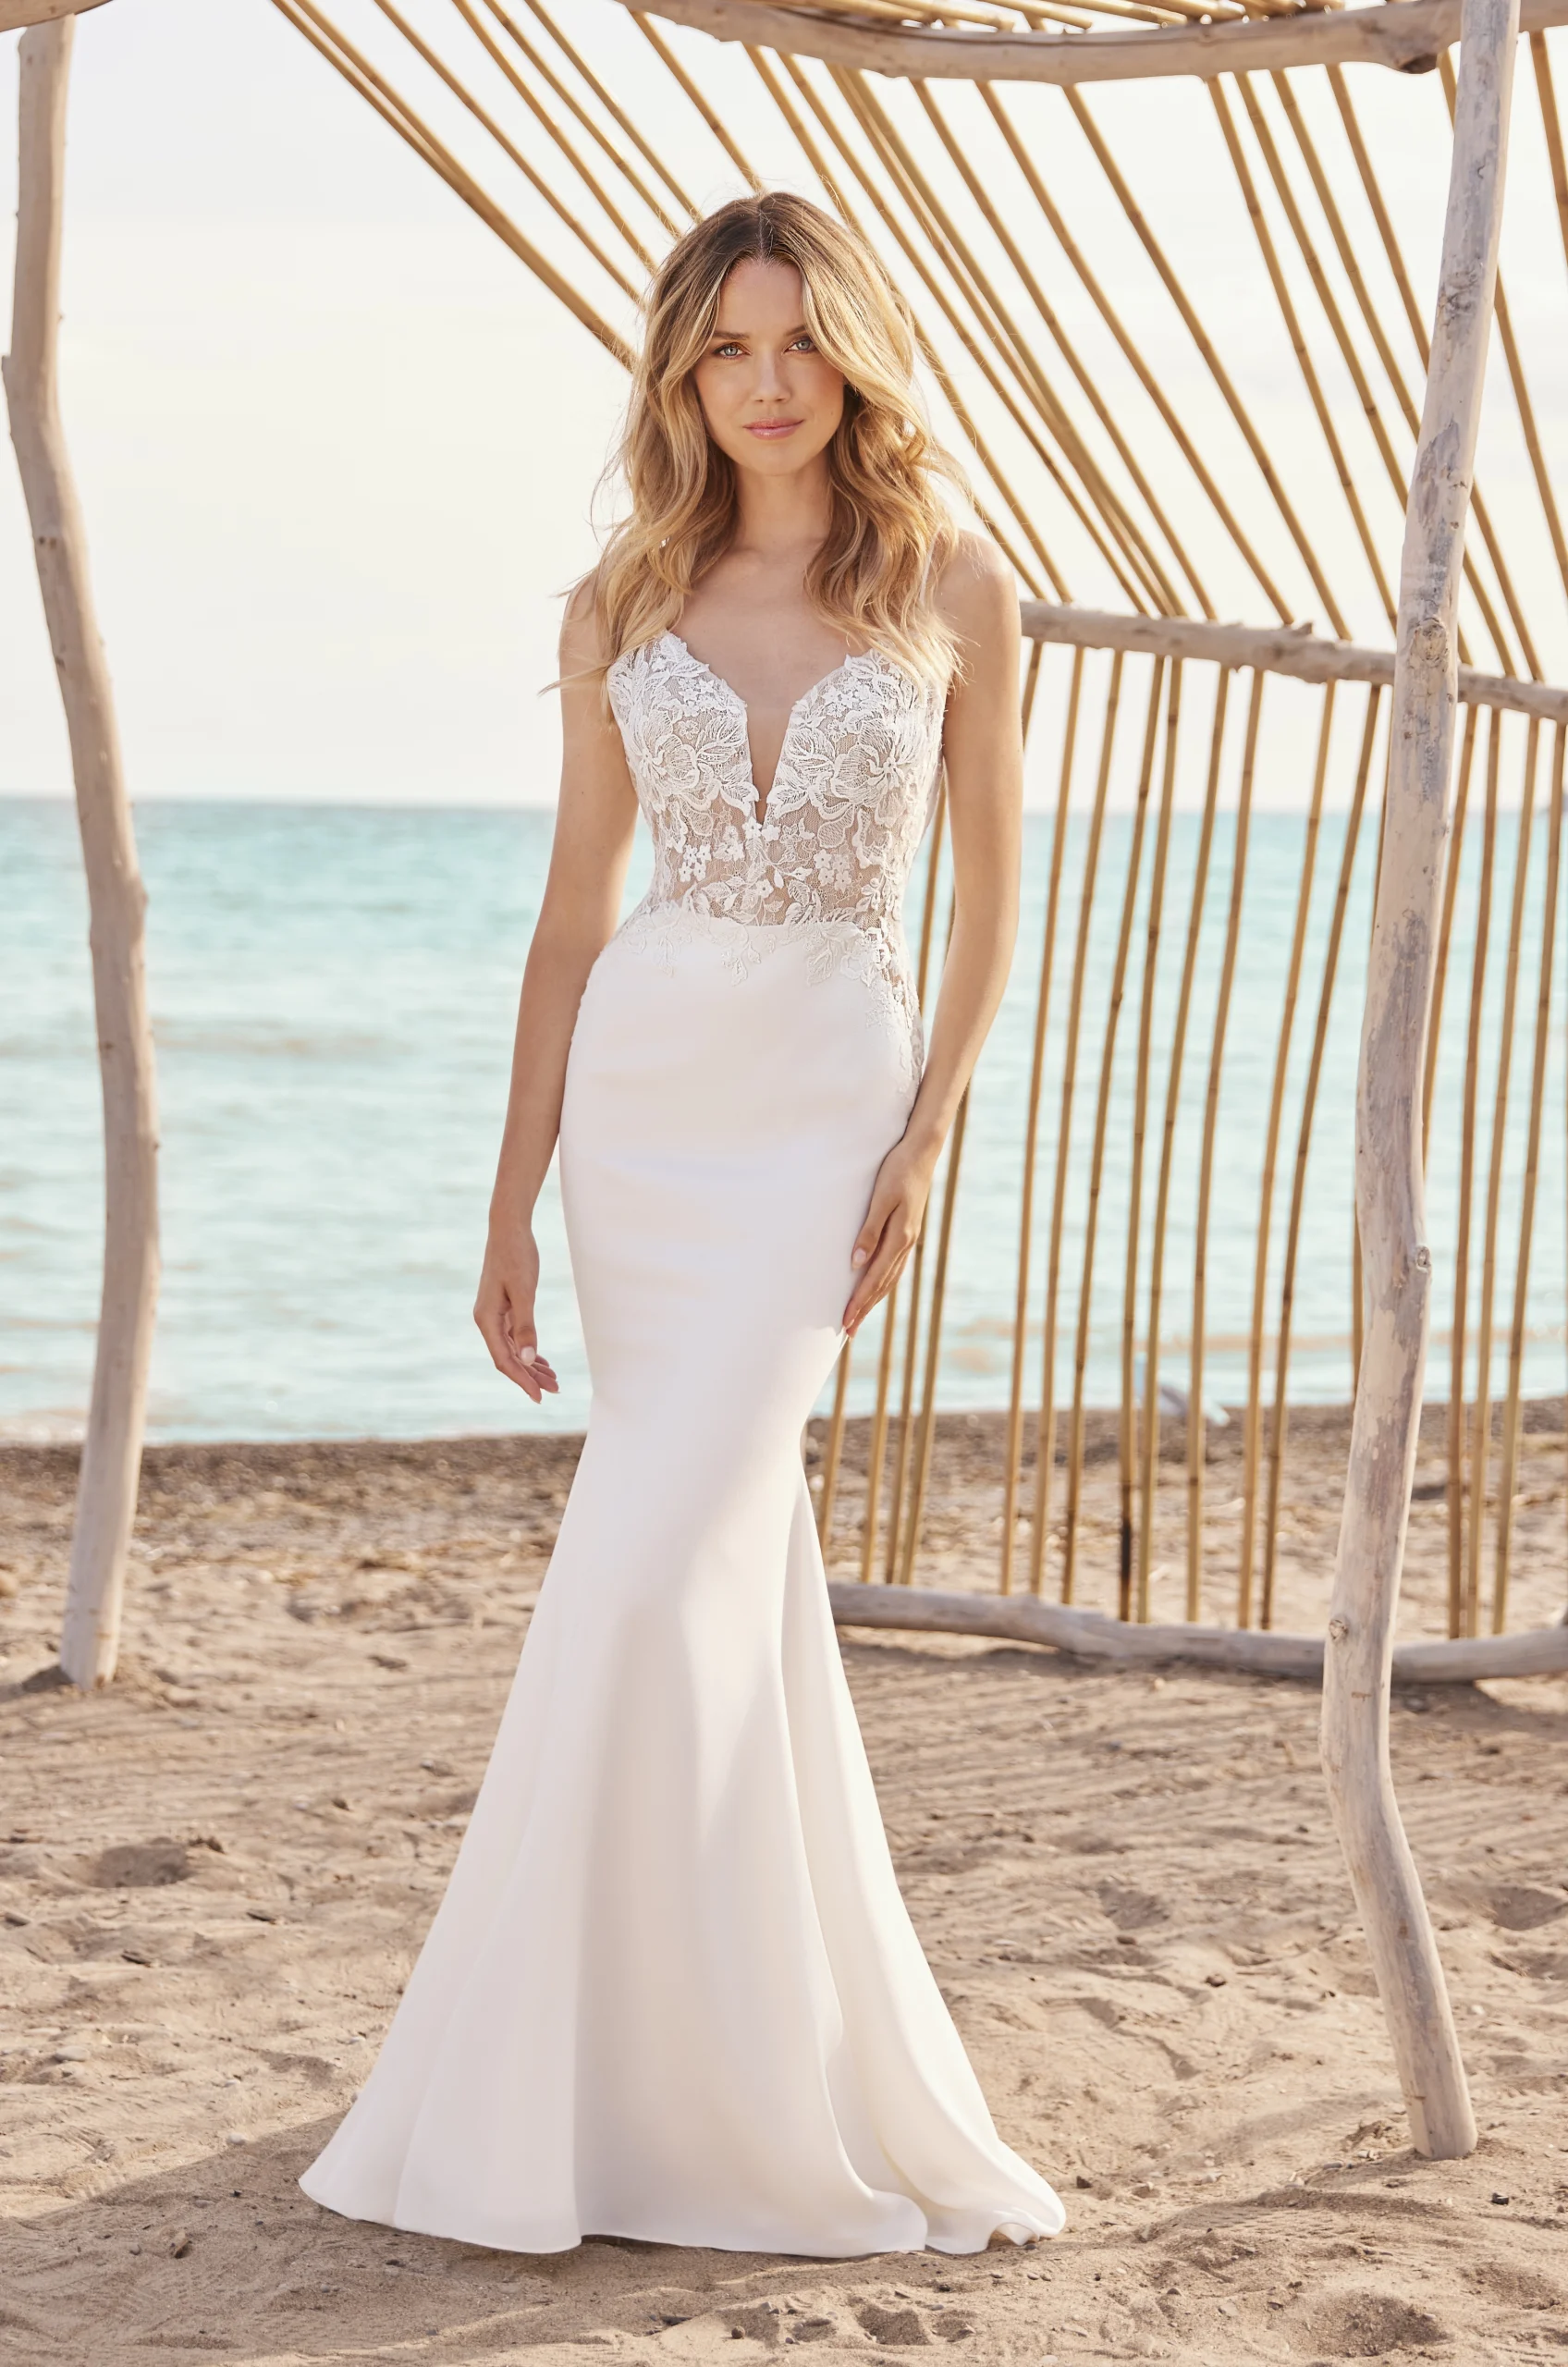 Detailed Lace Bodice with Fitted Crepe Skirt Wedding Dress - Style #M2483 from Mikaella Bridal